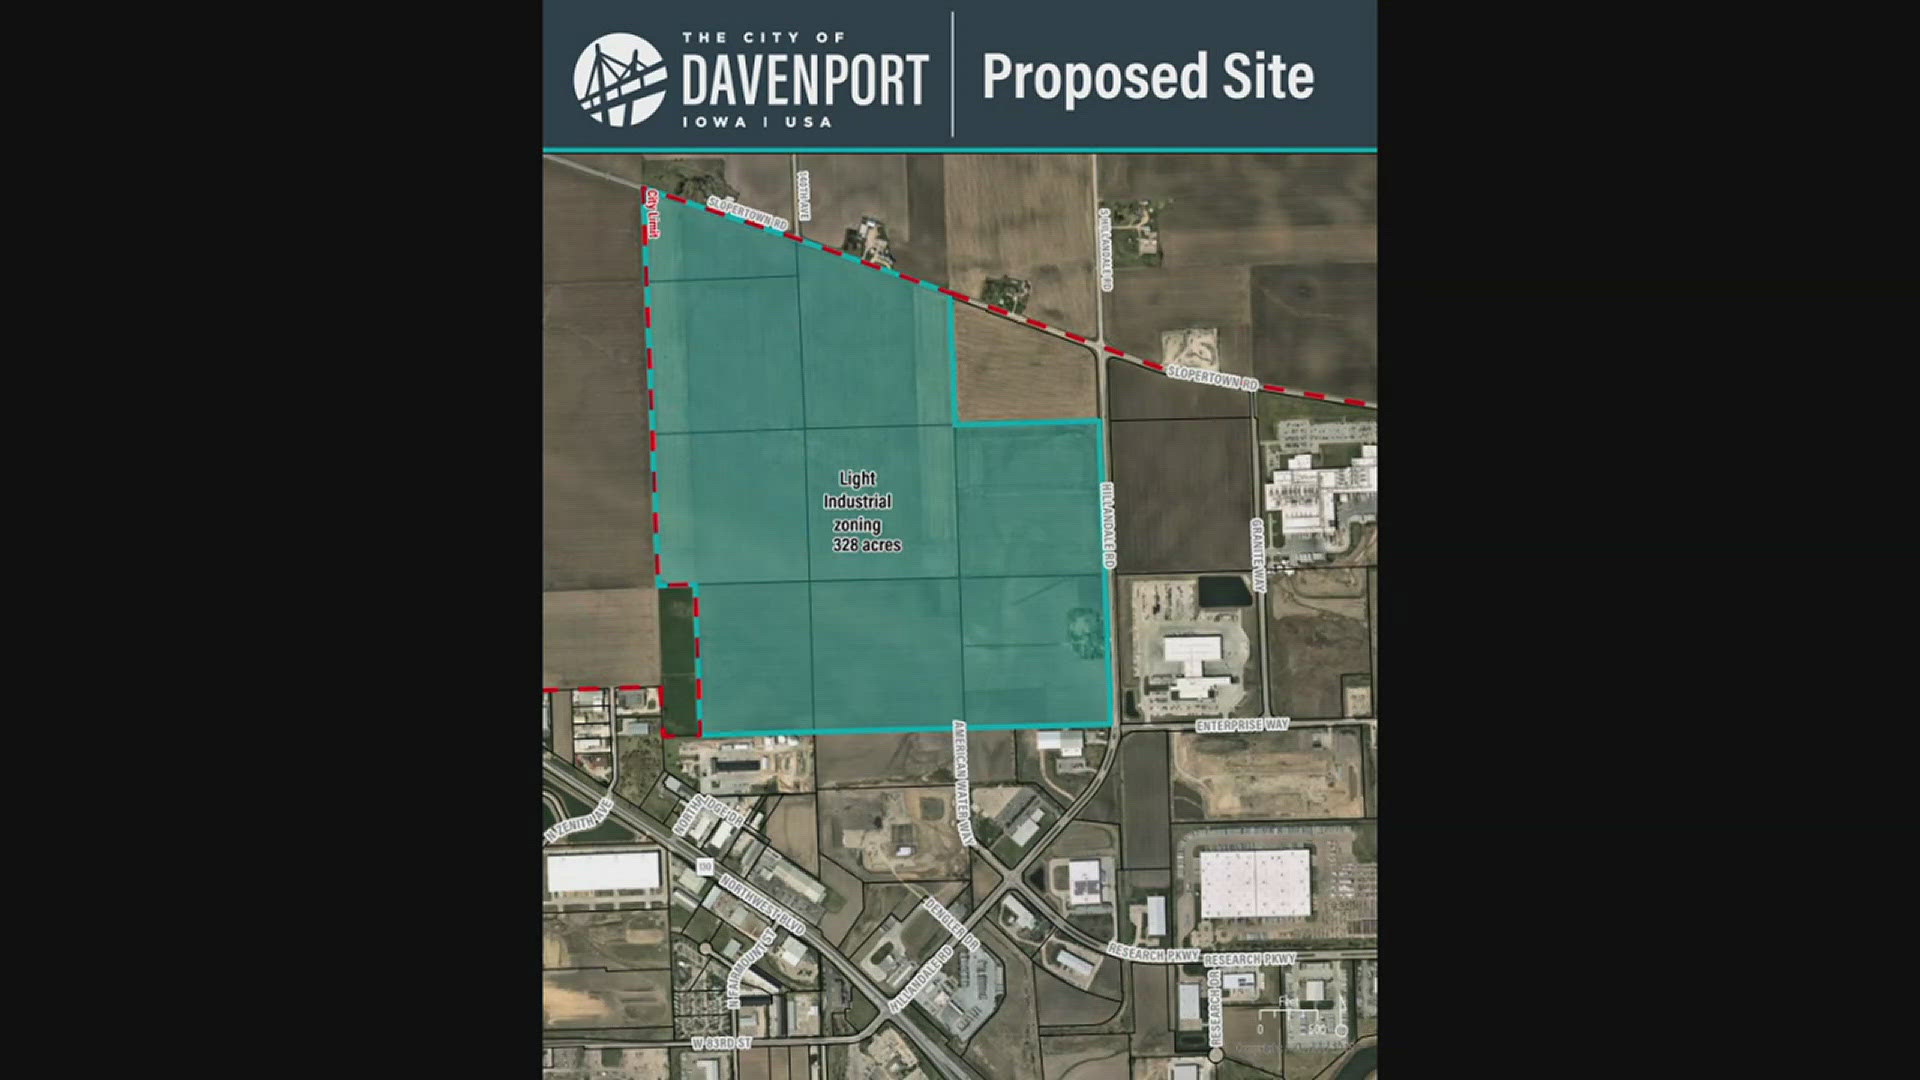 It's unclear what tech company it is but city documents show they want to develop on 328 acres of land near the new Amazon facility.